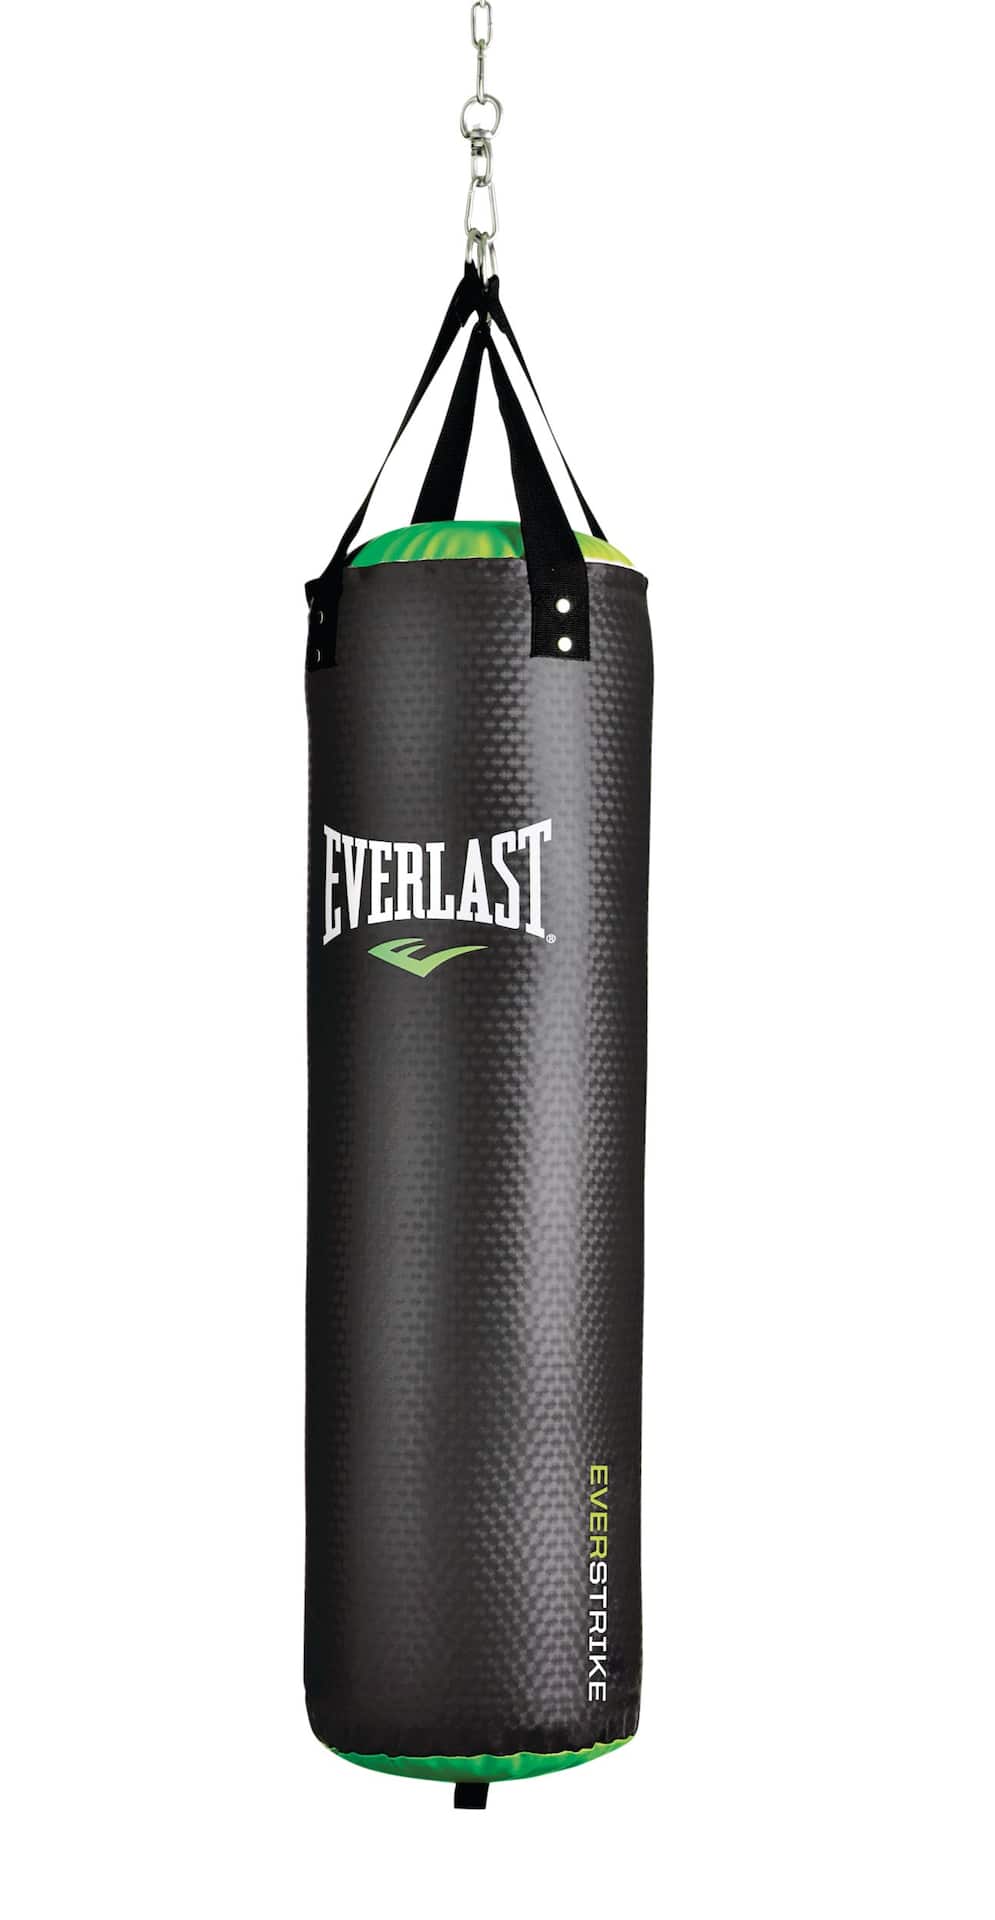 Buy HASHTAG FITNESS Punching Bag for Men unfilled with Stand Boxing kit, Punching  Bag Hangers Strap,Chain Ceiling Hook for Home Gym Training Workout Online  at Low Prices in India - Amazon.in